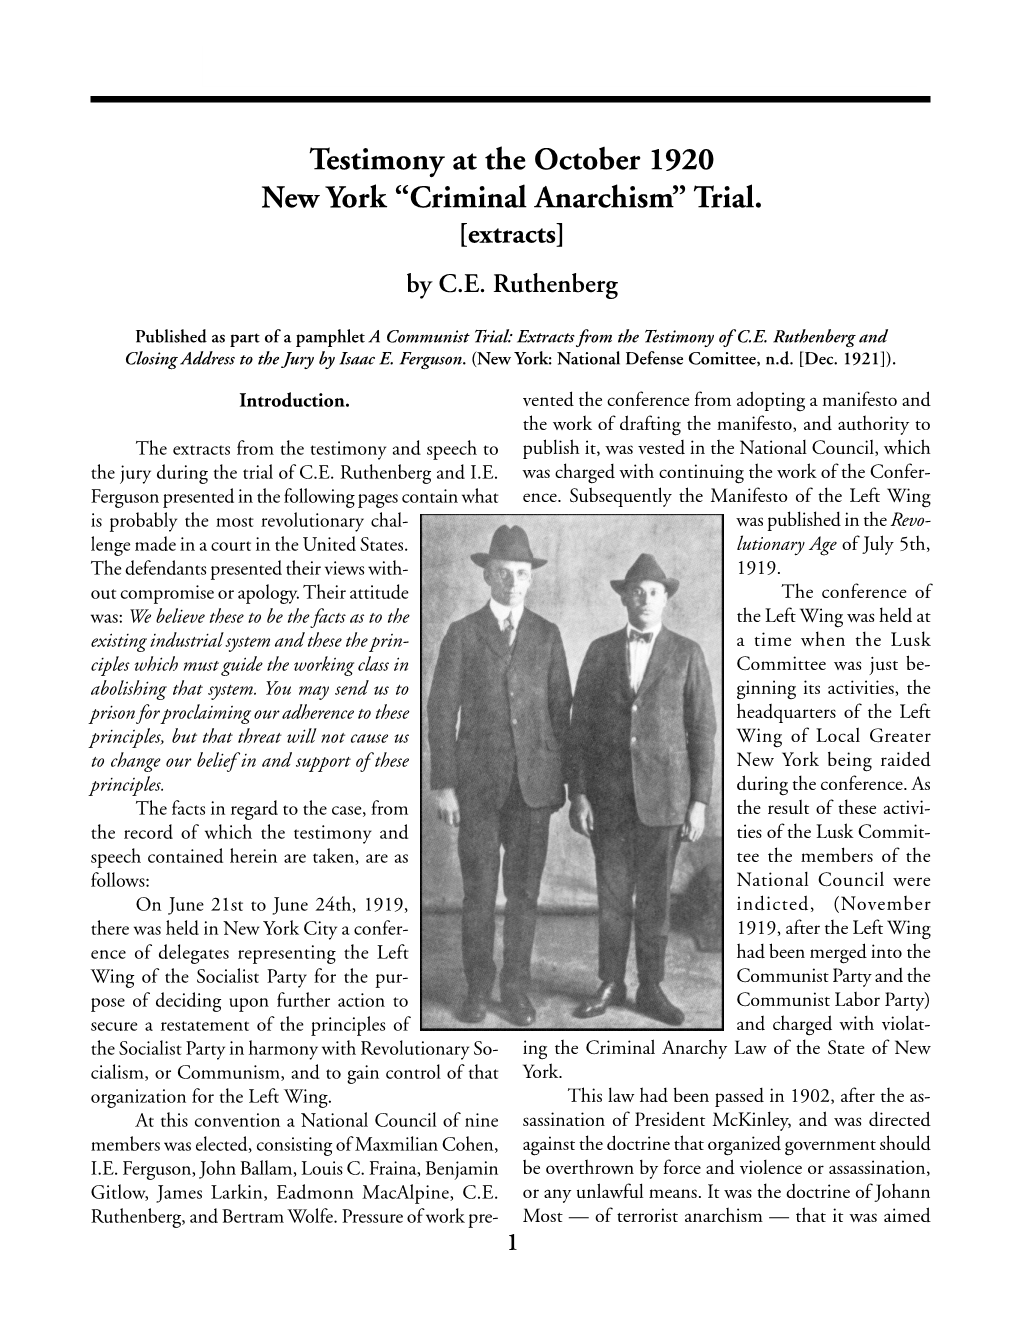 Testimony at the October 1920 New York “Criminal Anarchism” Trial. [Extracts] by C.E